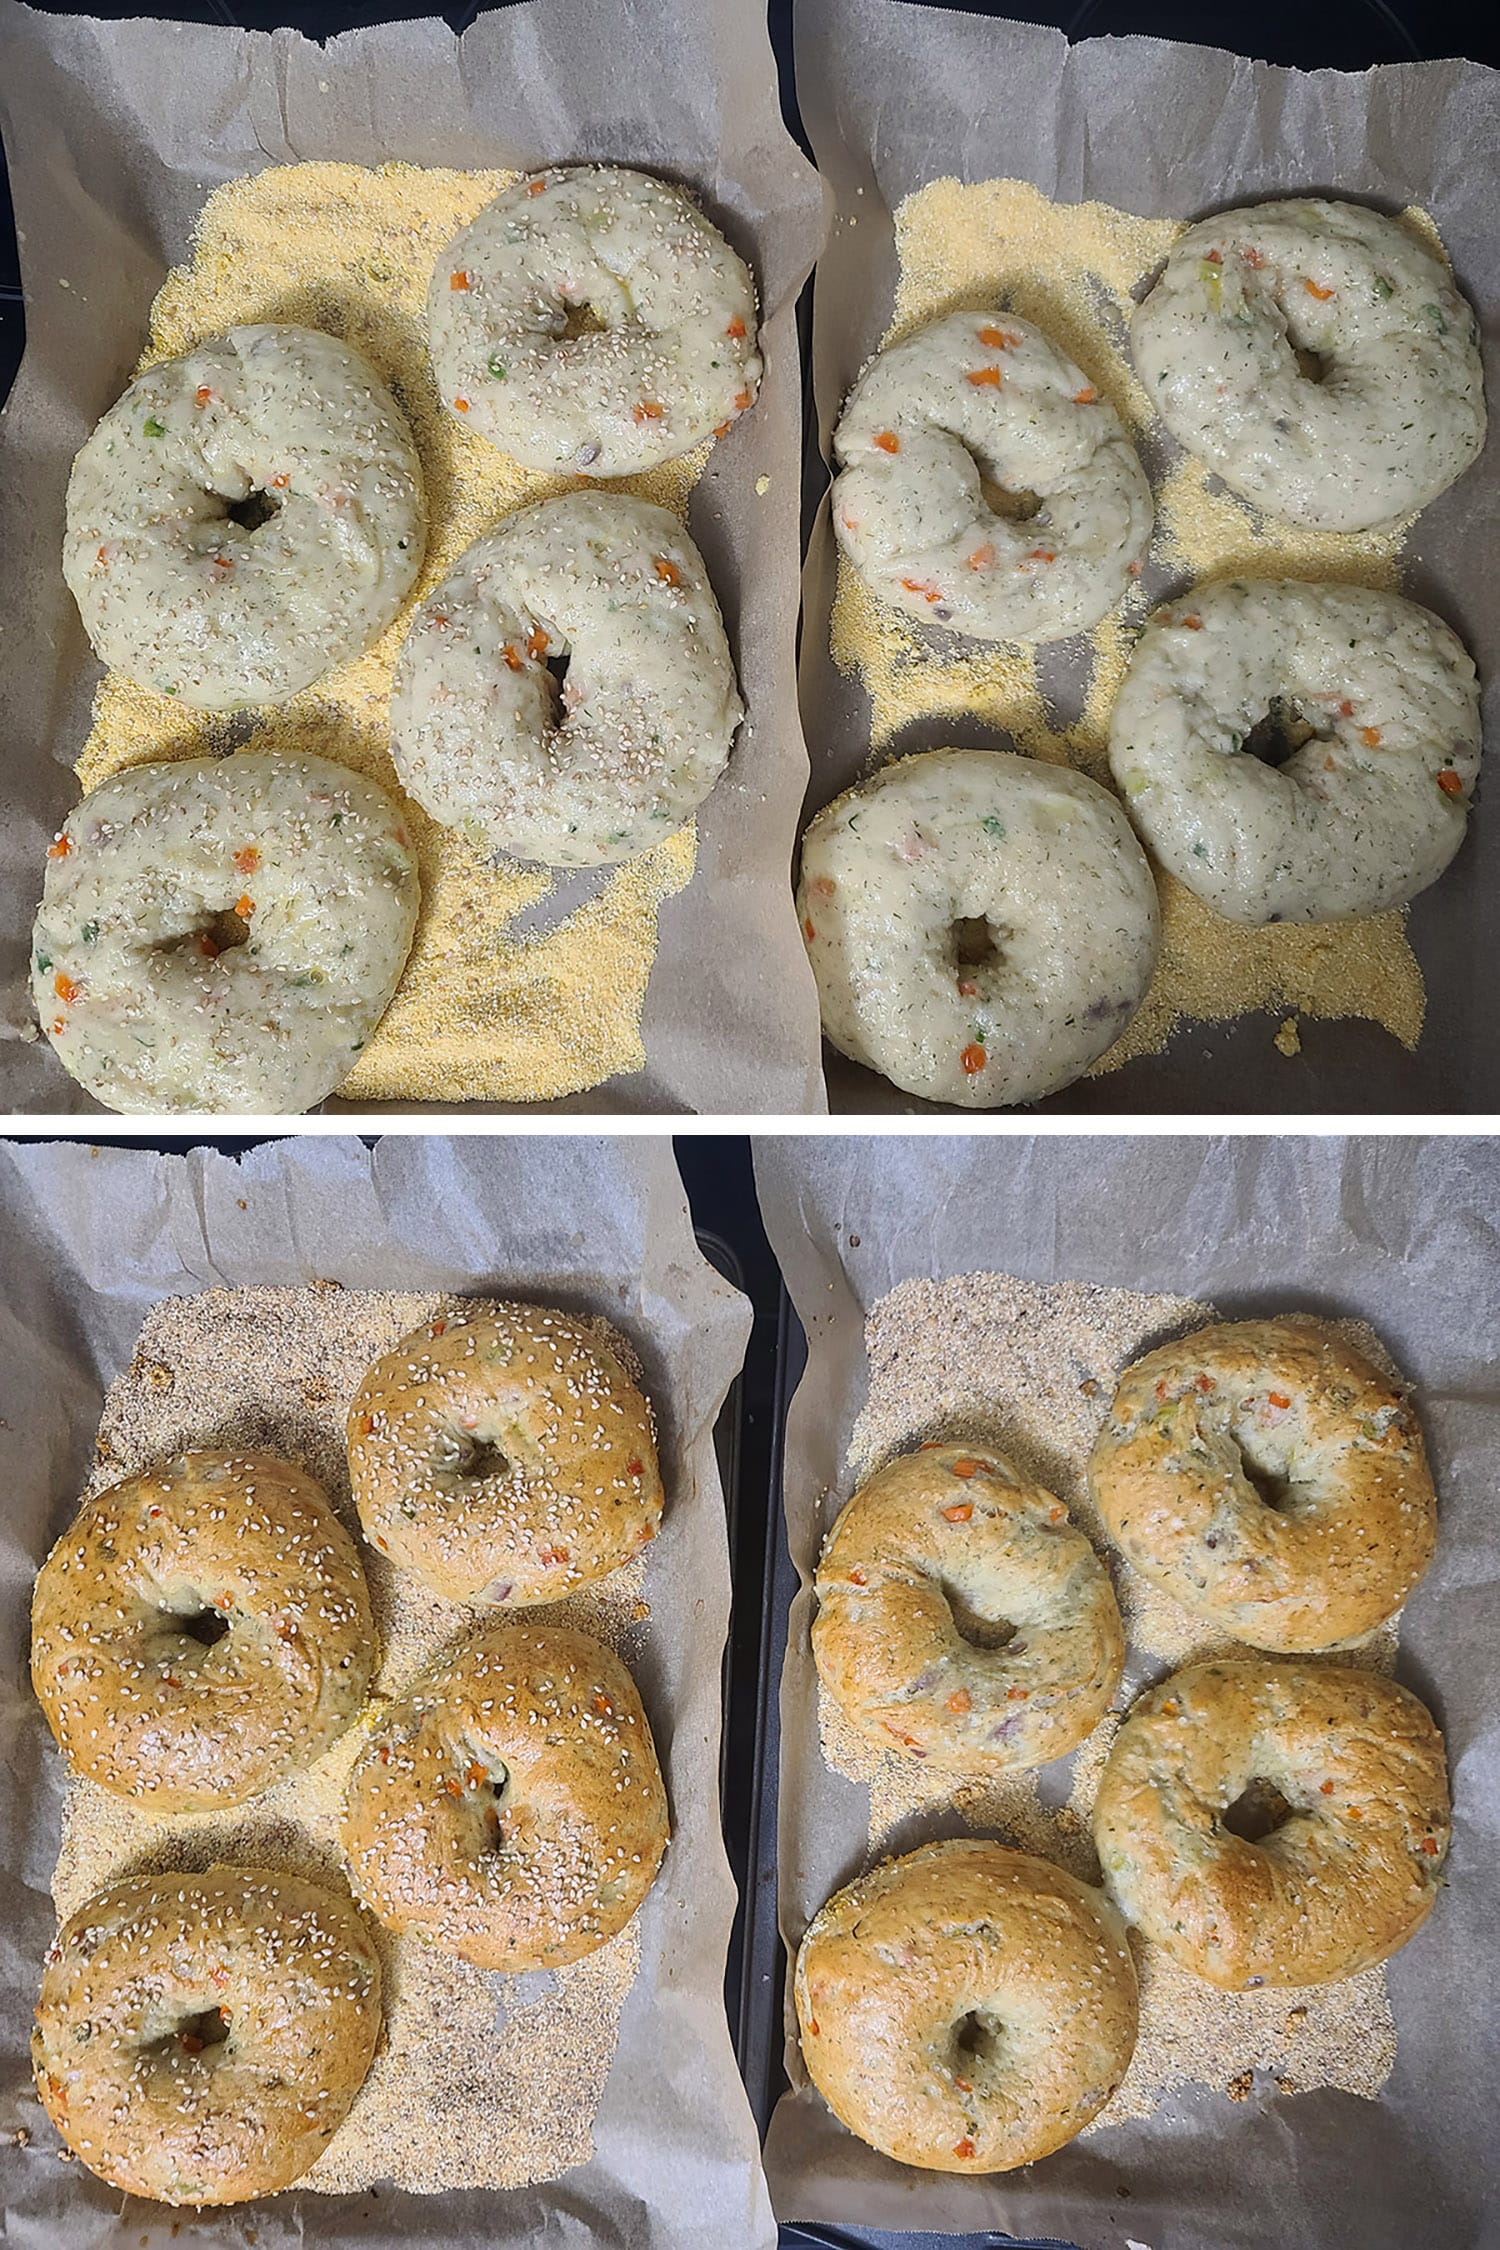 2 part image showing the 2 pans of veggie bagels, before and after baking.